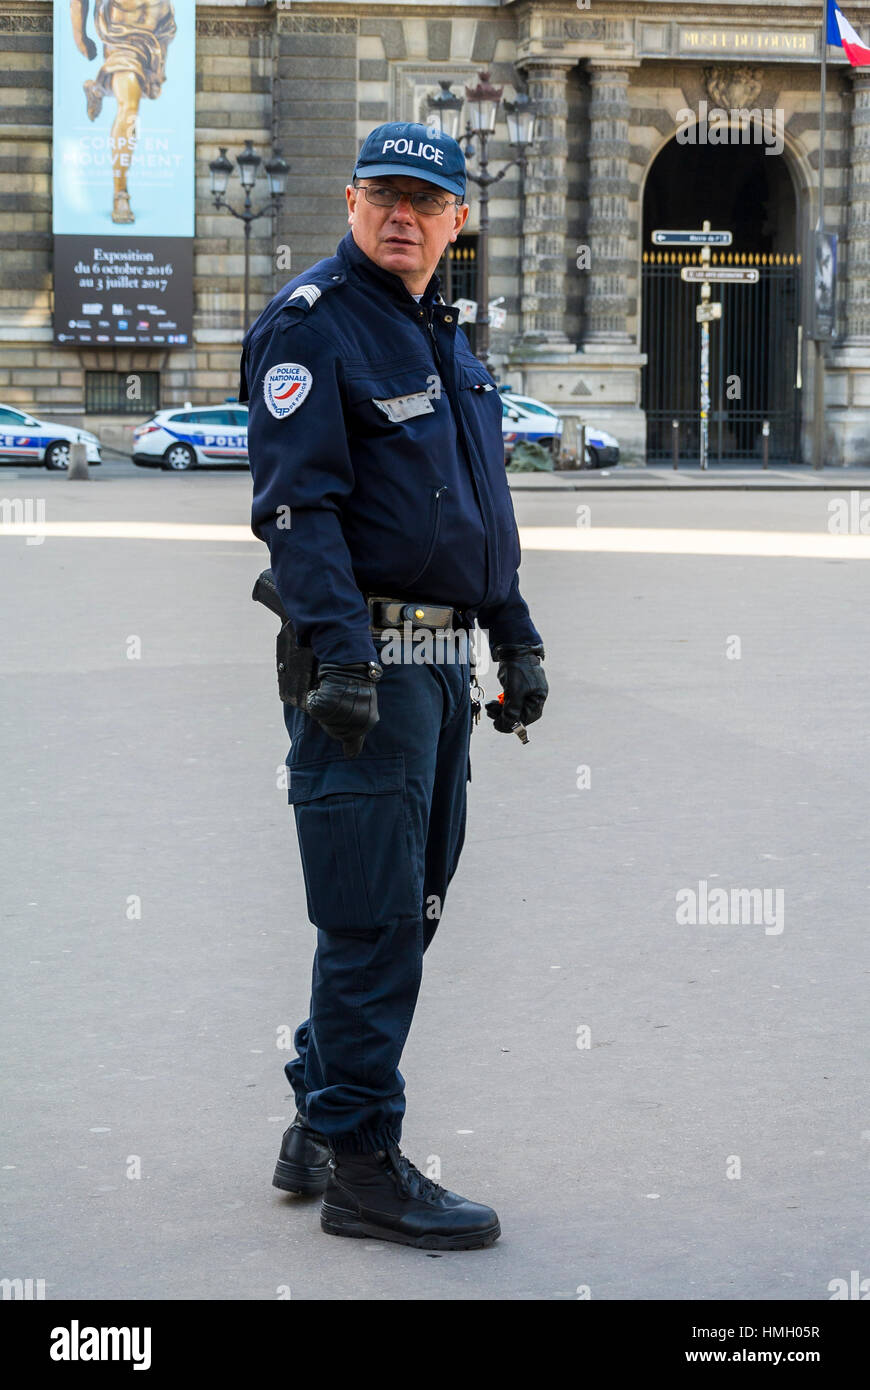 French Police Uniform High Resolution Stock Photography and Images - Alamy